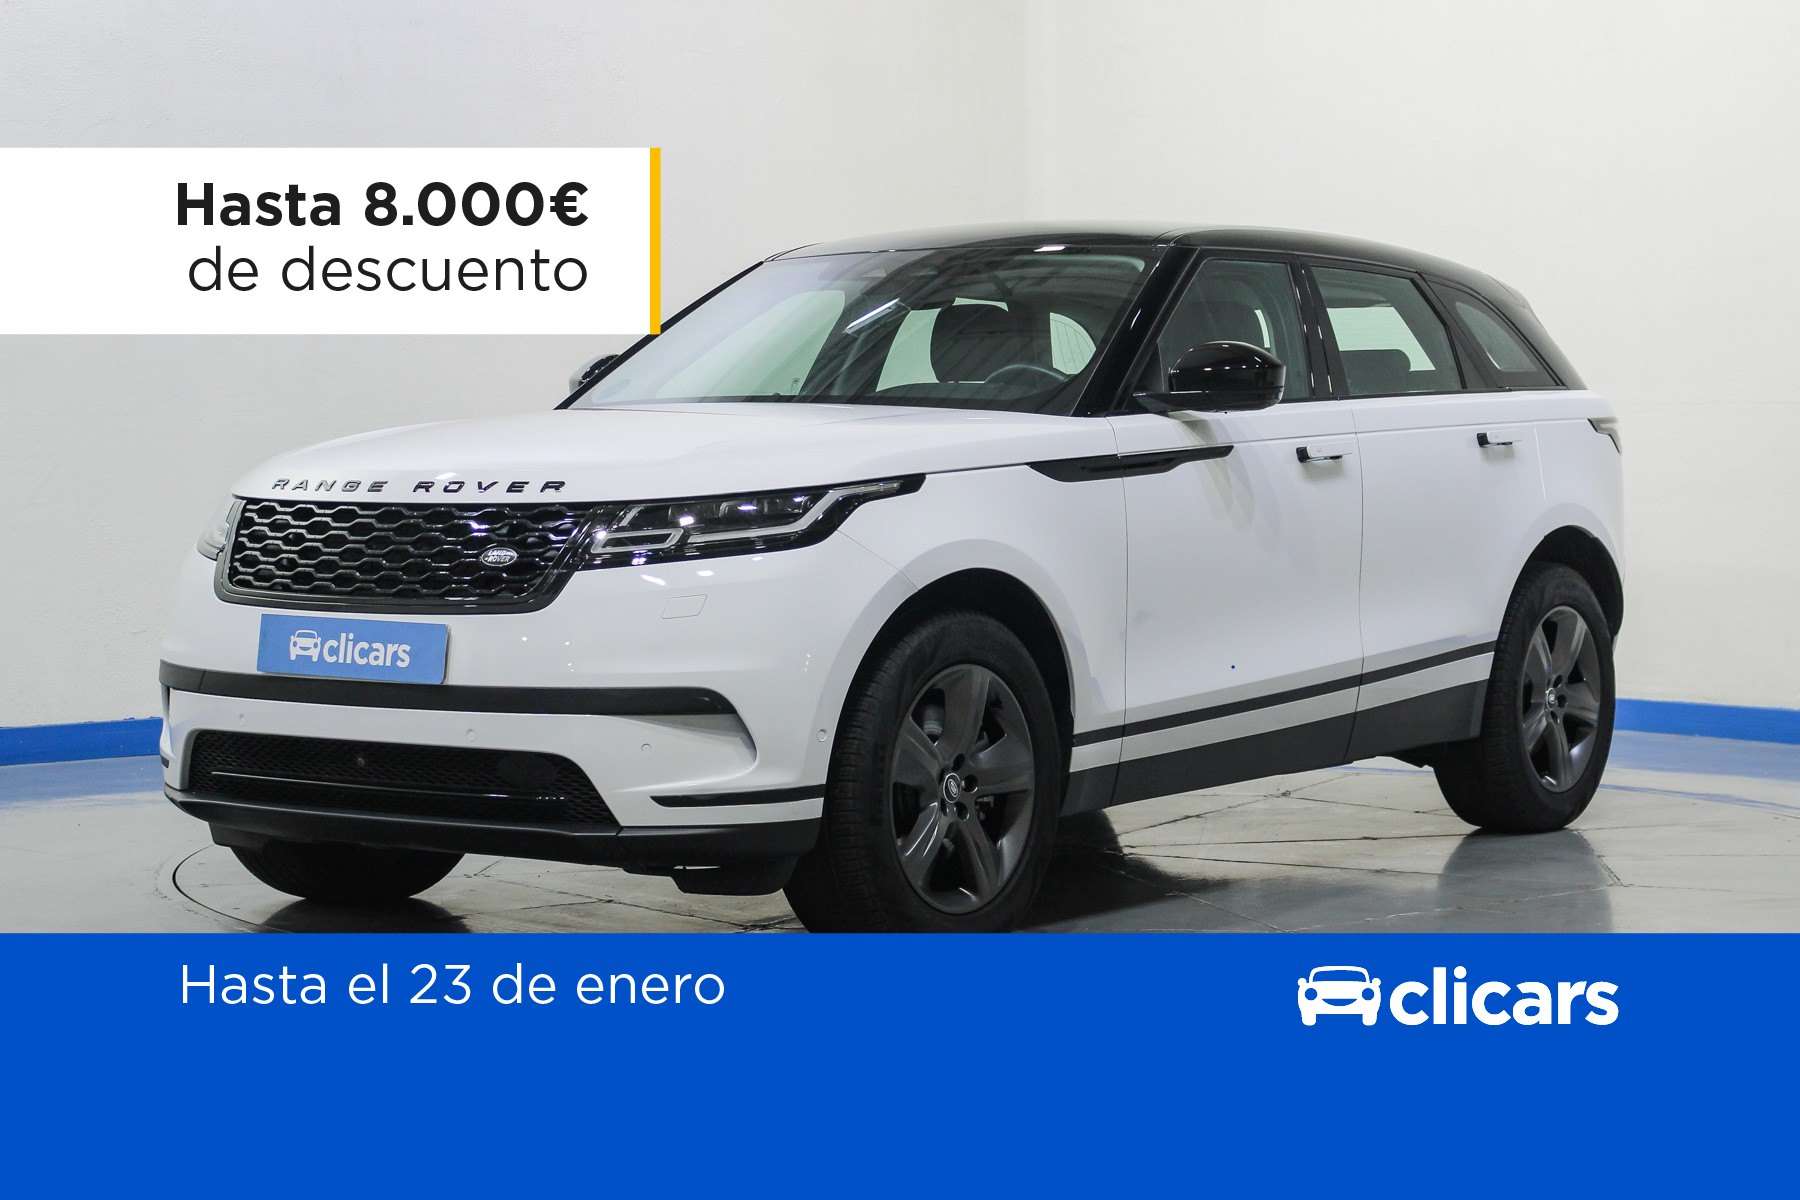 Land Rover Range Rover Velar Off-Road/Pick-up in White used in MADRID for € 51,890.-